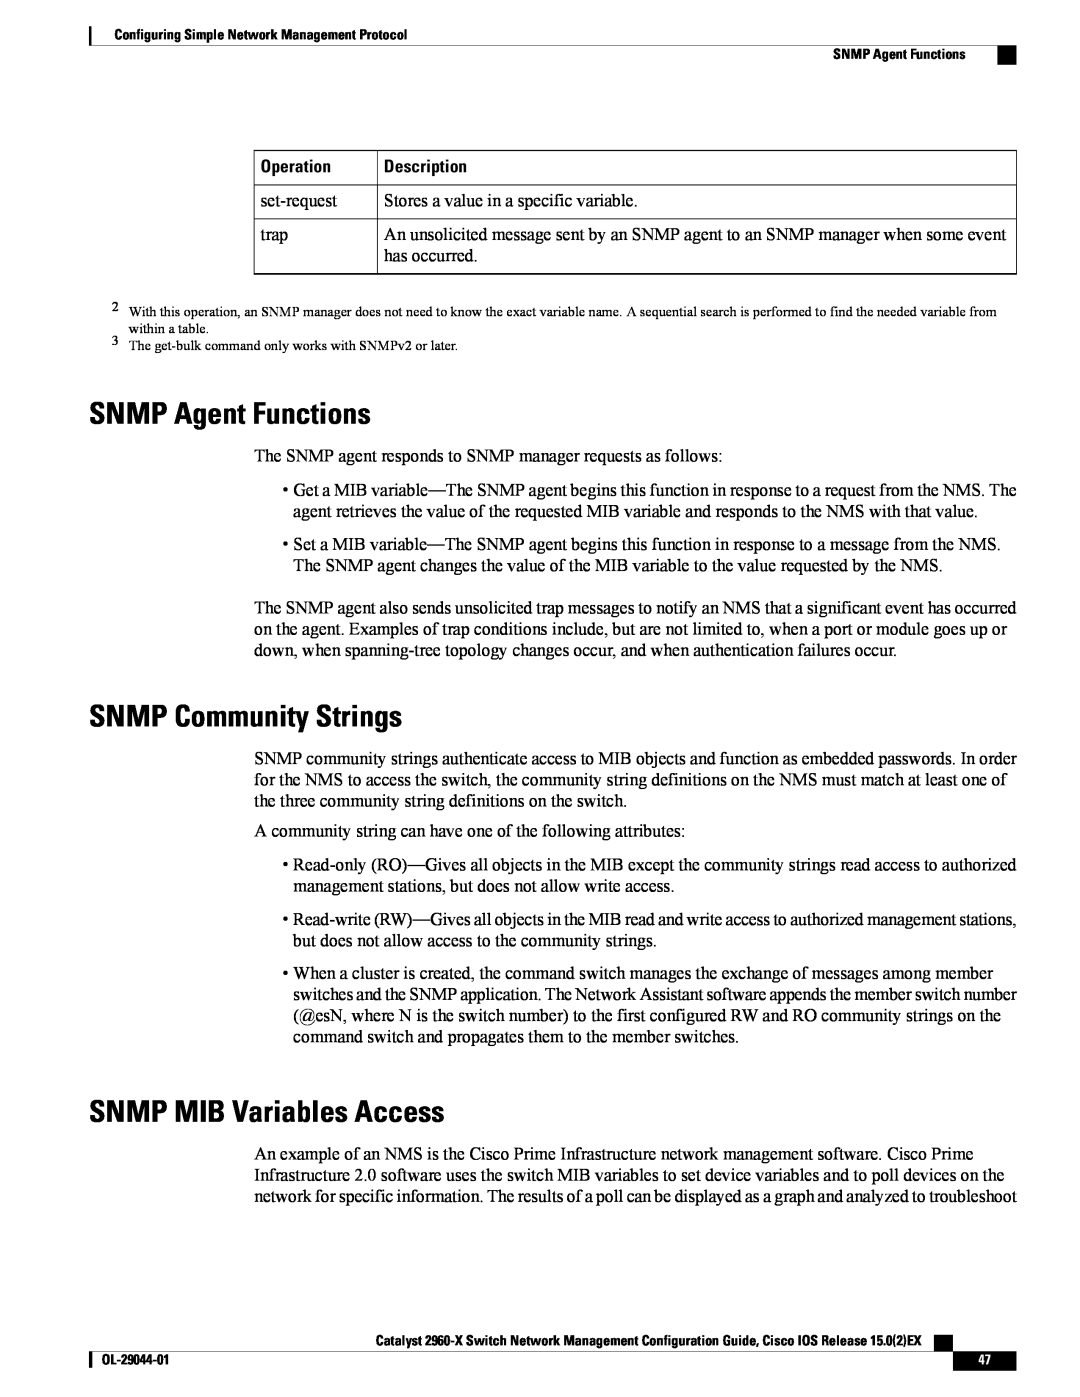 Cisco Systems WSC2960X24TSLL manual SNMP Agent Functions, SNMP Community Strings, SNMP MIB Variables Access, Operation 